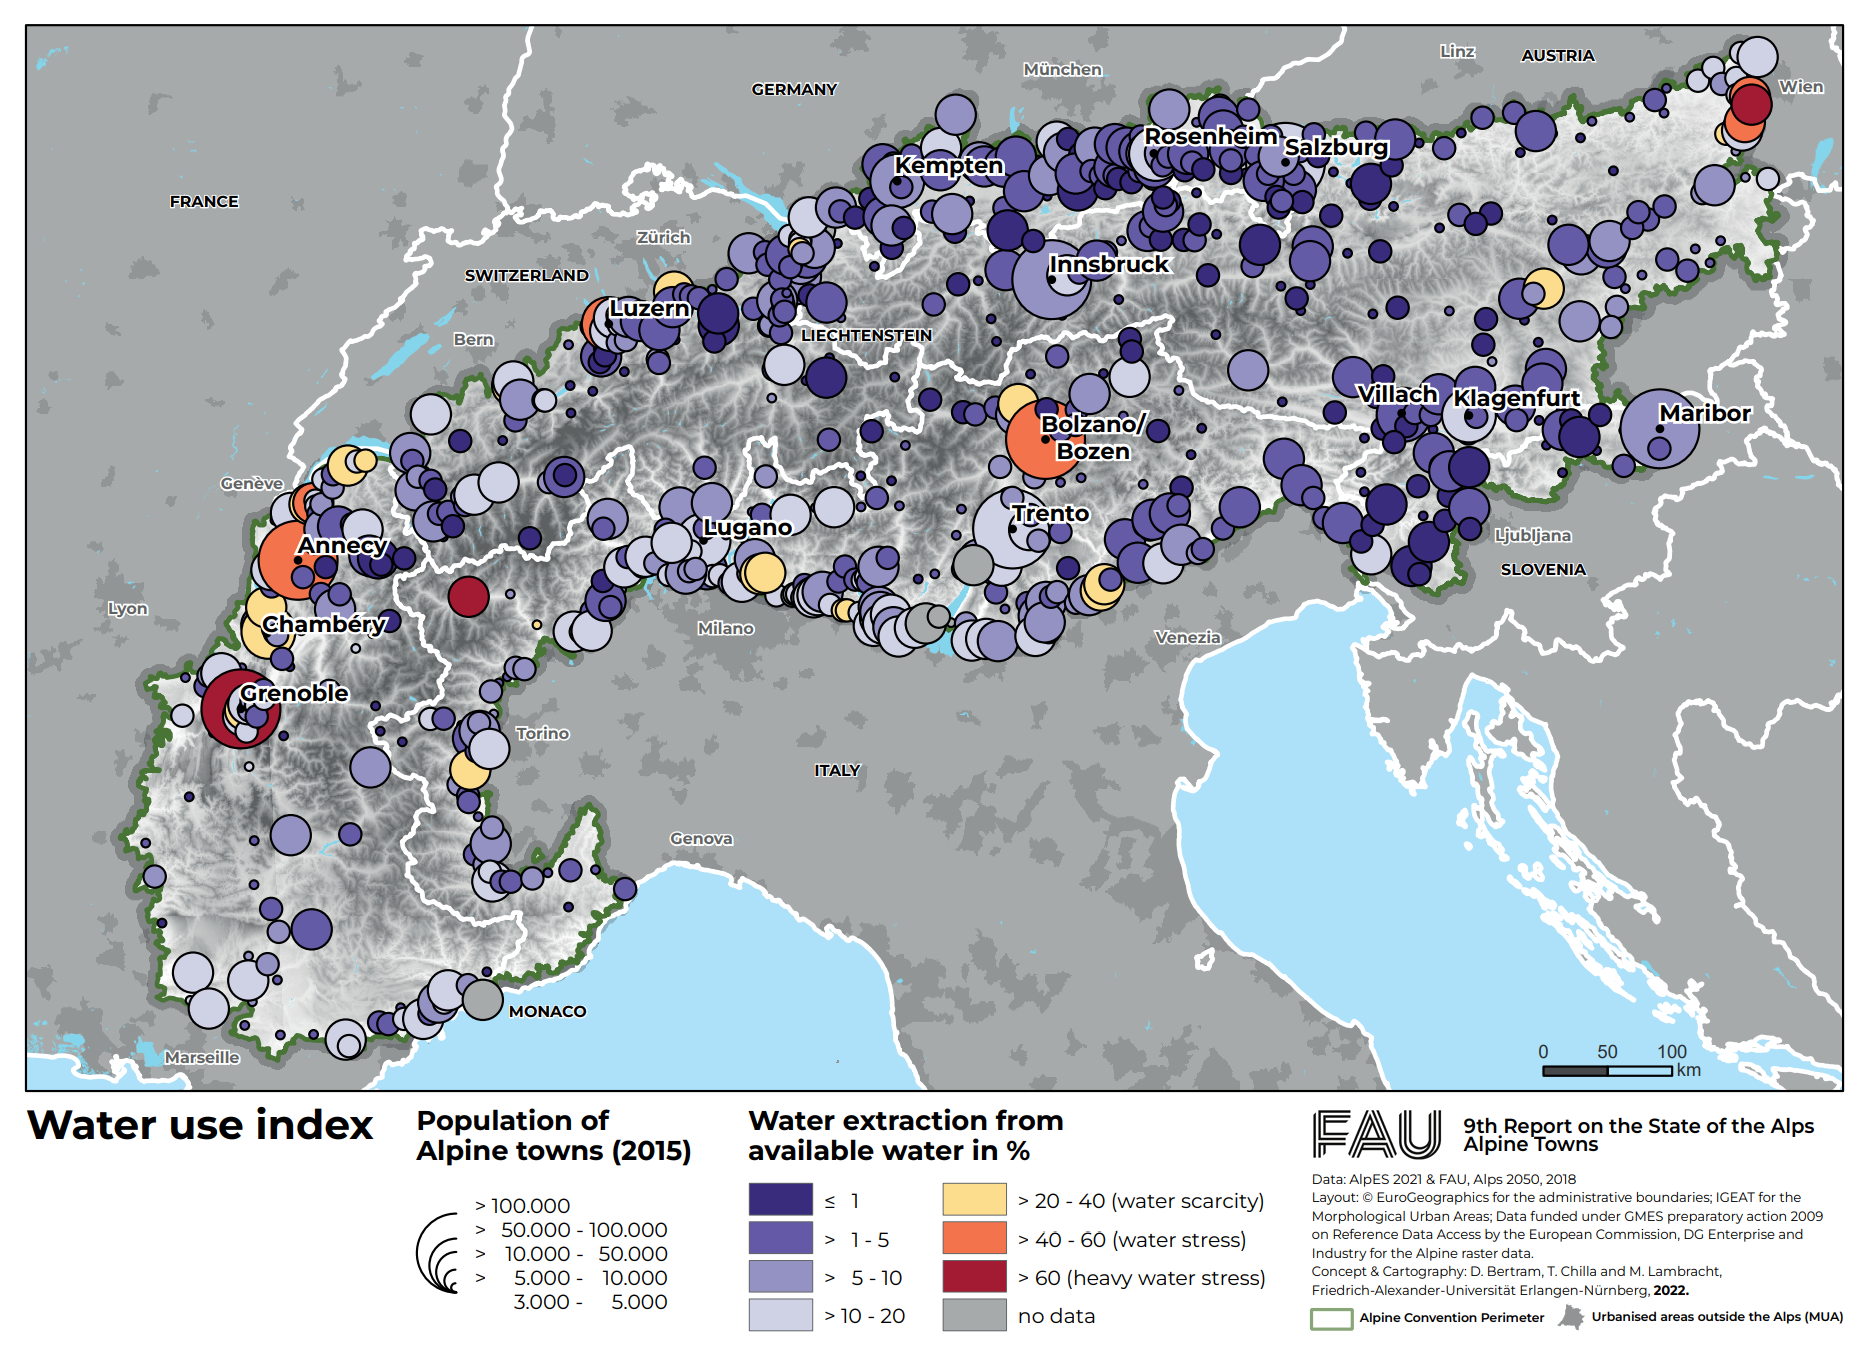 Water extraction from available water by Alpine towns in 2022. The map shows several Alpine towns that are already affected by water shortage, or at risk of being affected 
in the near future, mainly concentrated in industrial agglomerations such as Grenoble, Annecy, or Vienna, and in/around Bolzano/Bozen where the agricultural sector is a heavy water consumer. The southern Alpine towns (especially in France and Italy) with their drier climates are more likely to undergo water shortages than the northern towns. This is particularly true of inner-Alpine dry valleys such as the Aosta Valley in north-western Italy, already affected by significant water stress (e.g. Obojes et al. 2018). Graphic: FAU